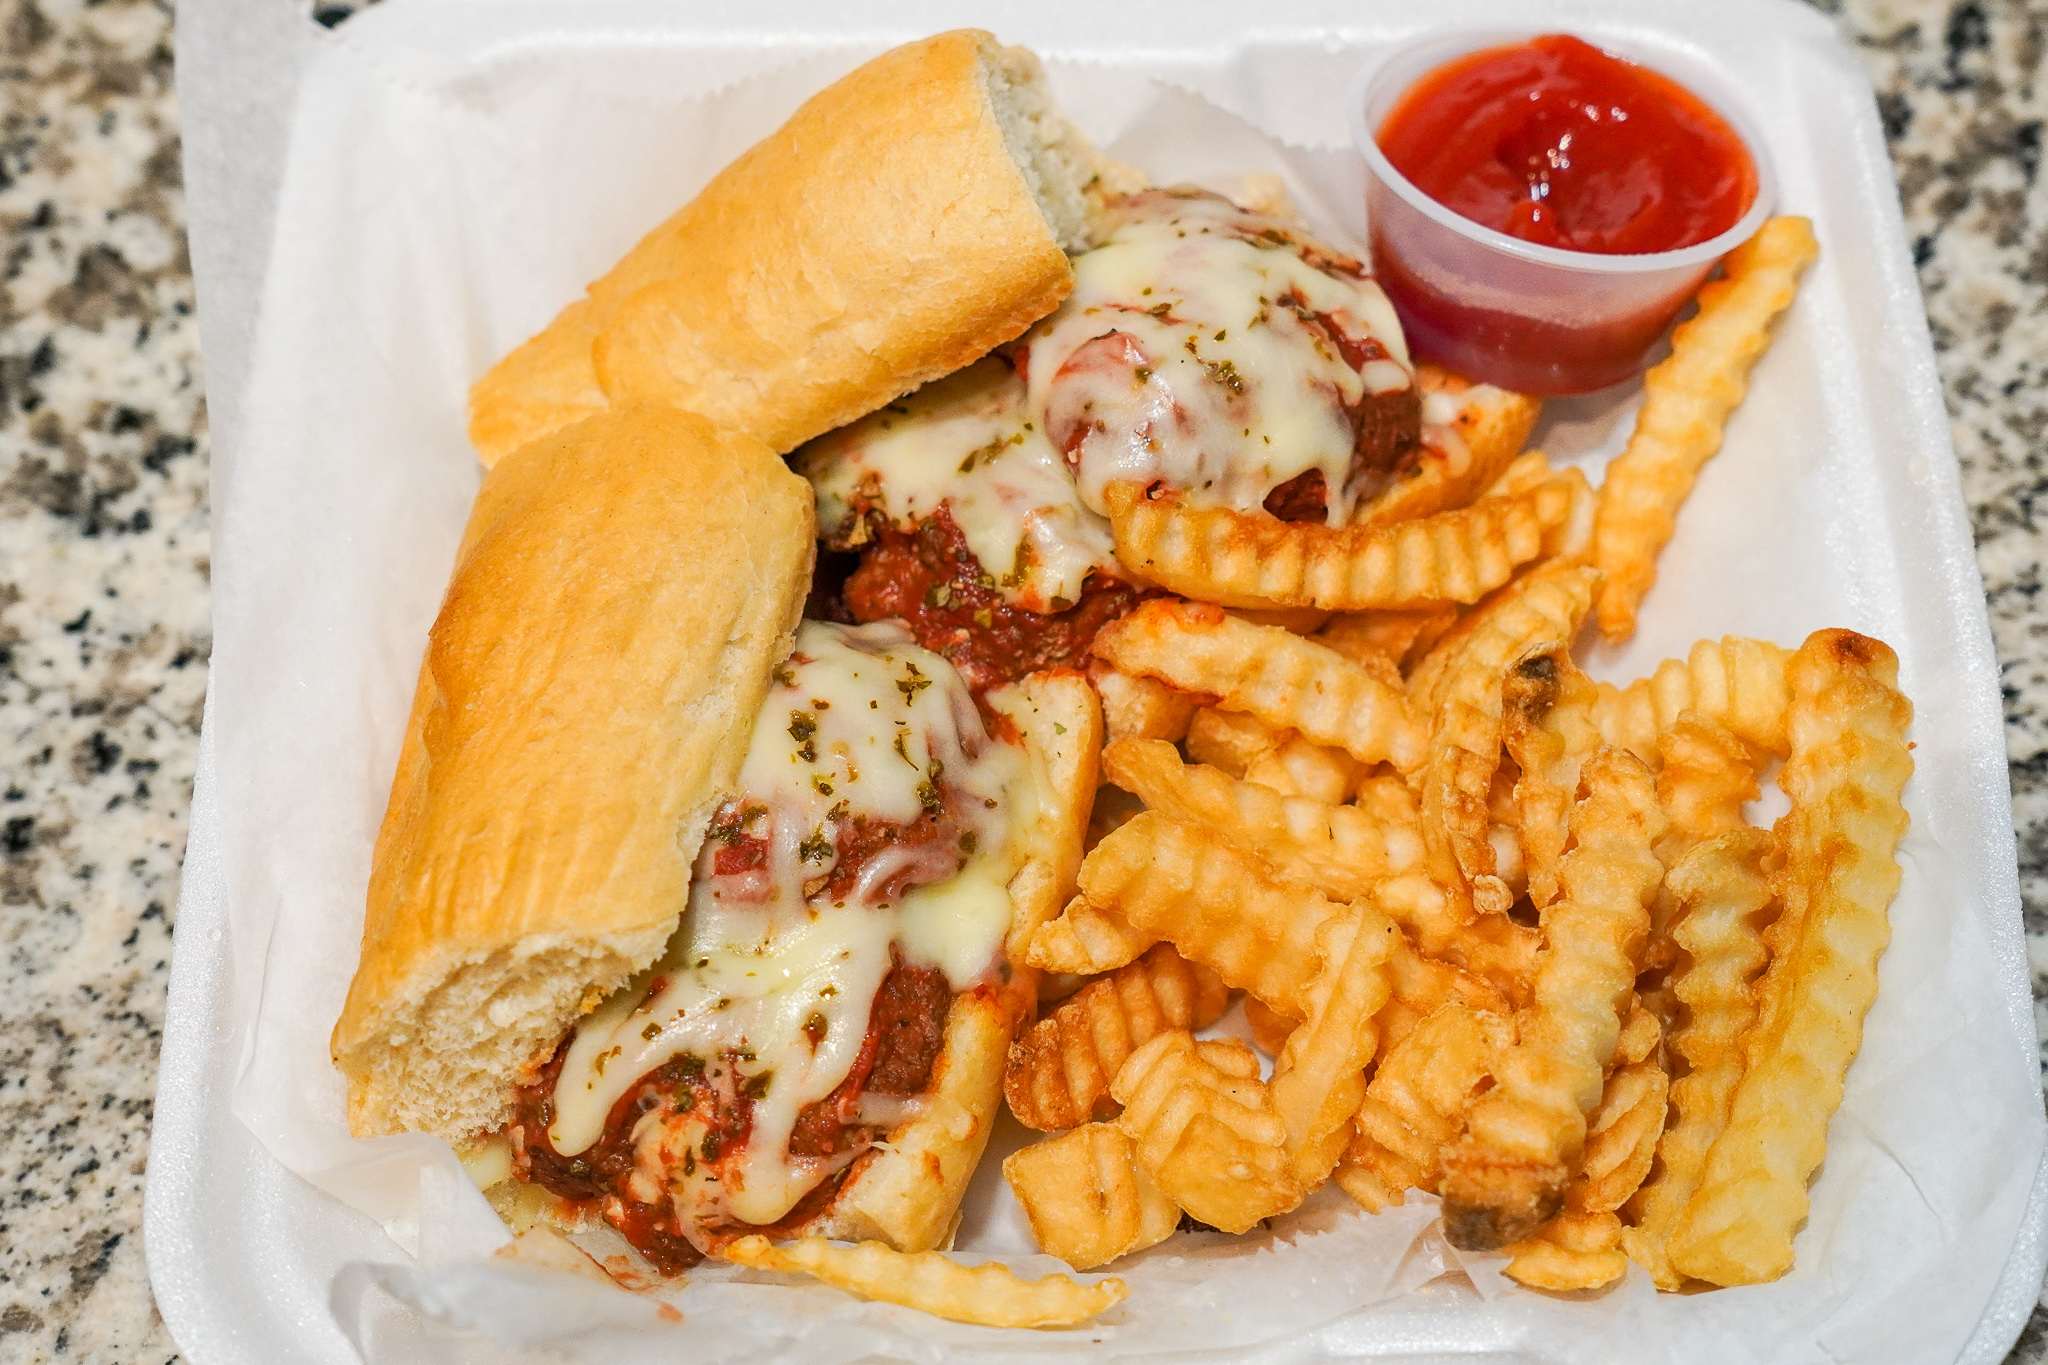 Category 36 Meatball Sub with Fries